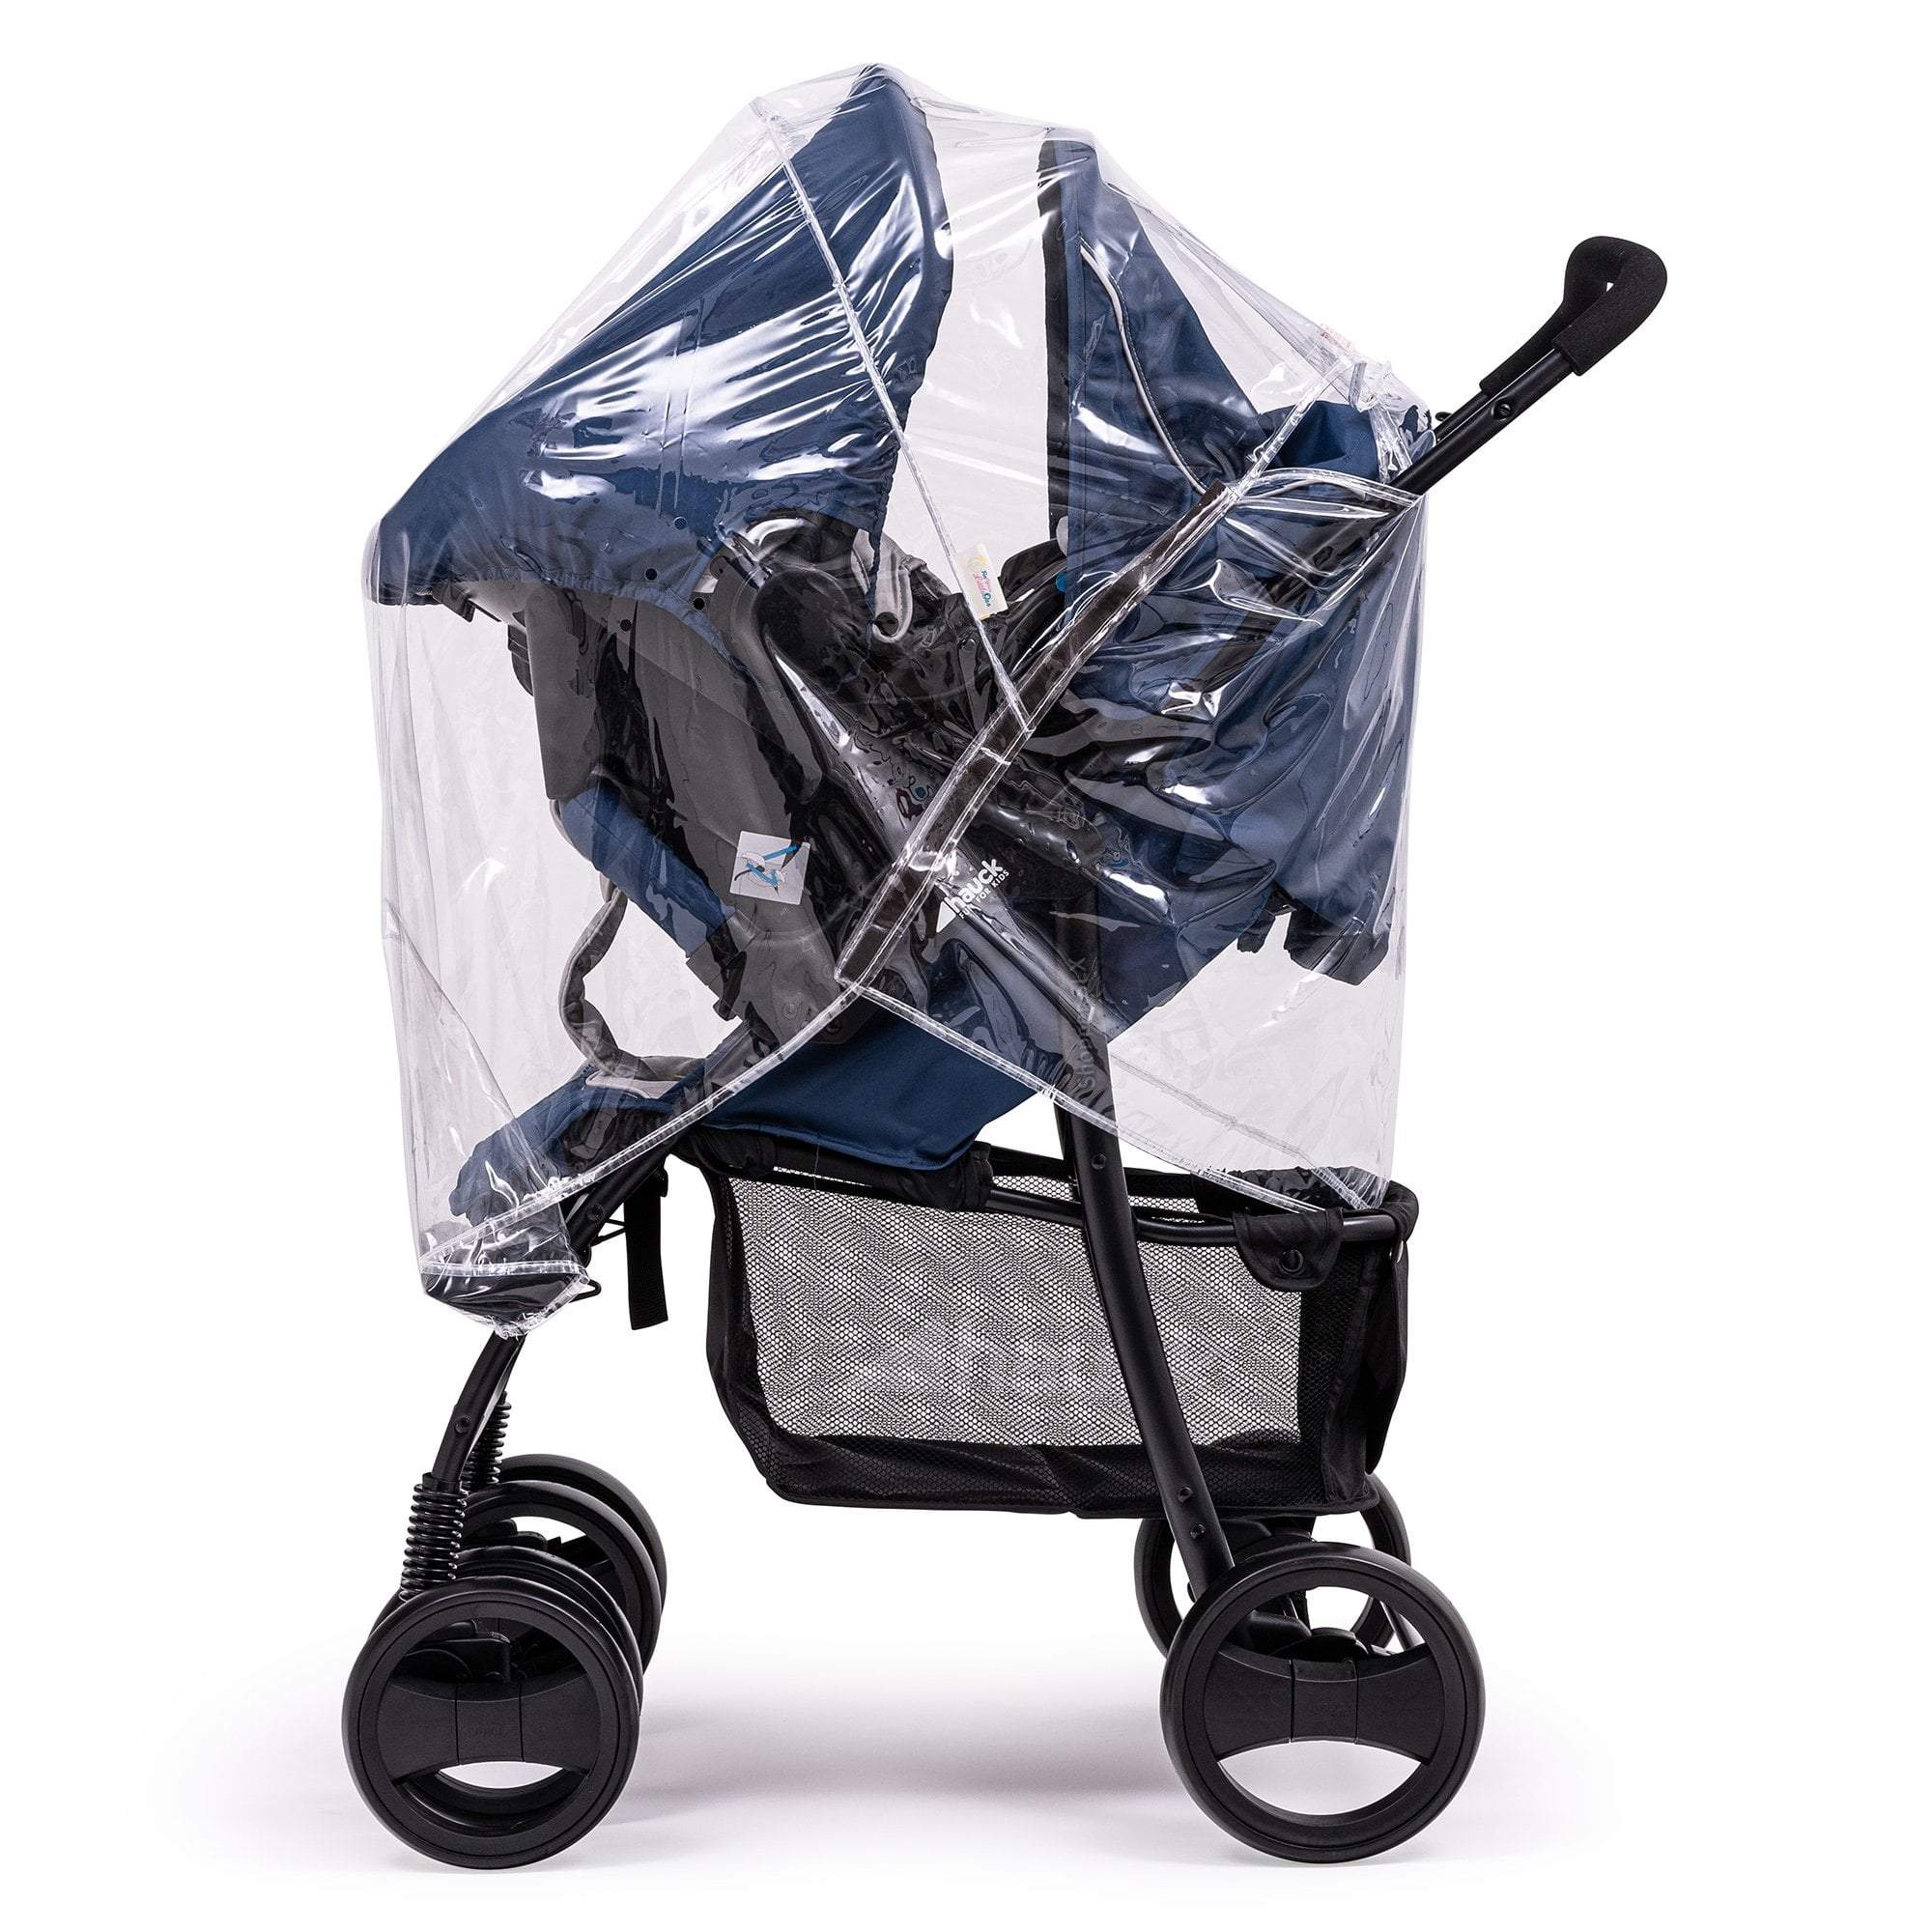 Travel System Raincover Compatible with Gesslein - Fits All Models - For Your Little One